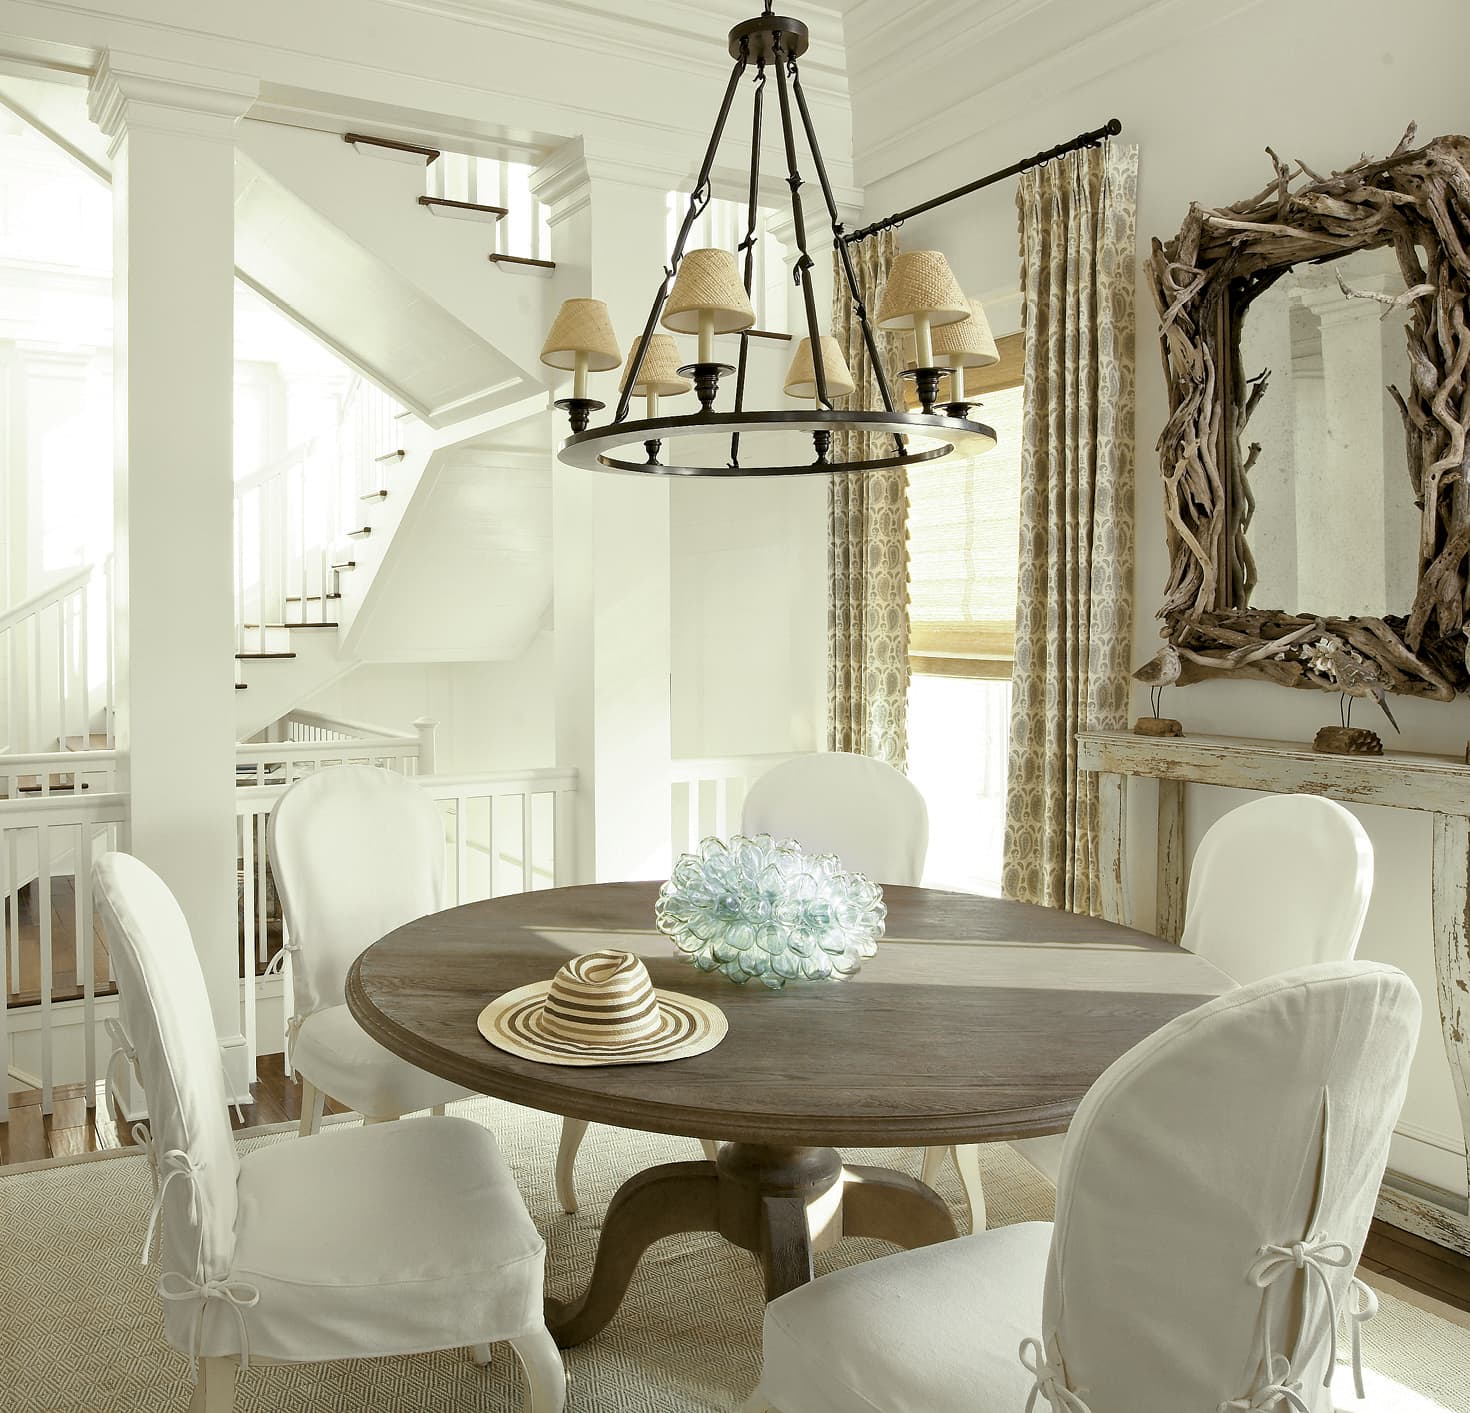 Dining area with table and chandelier